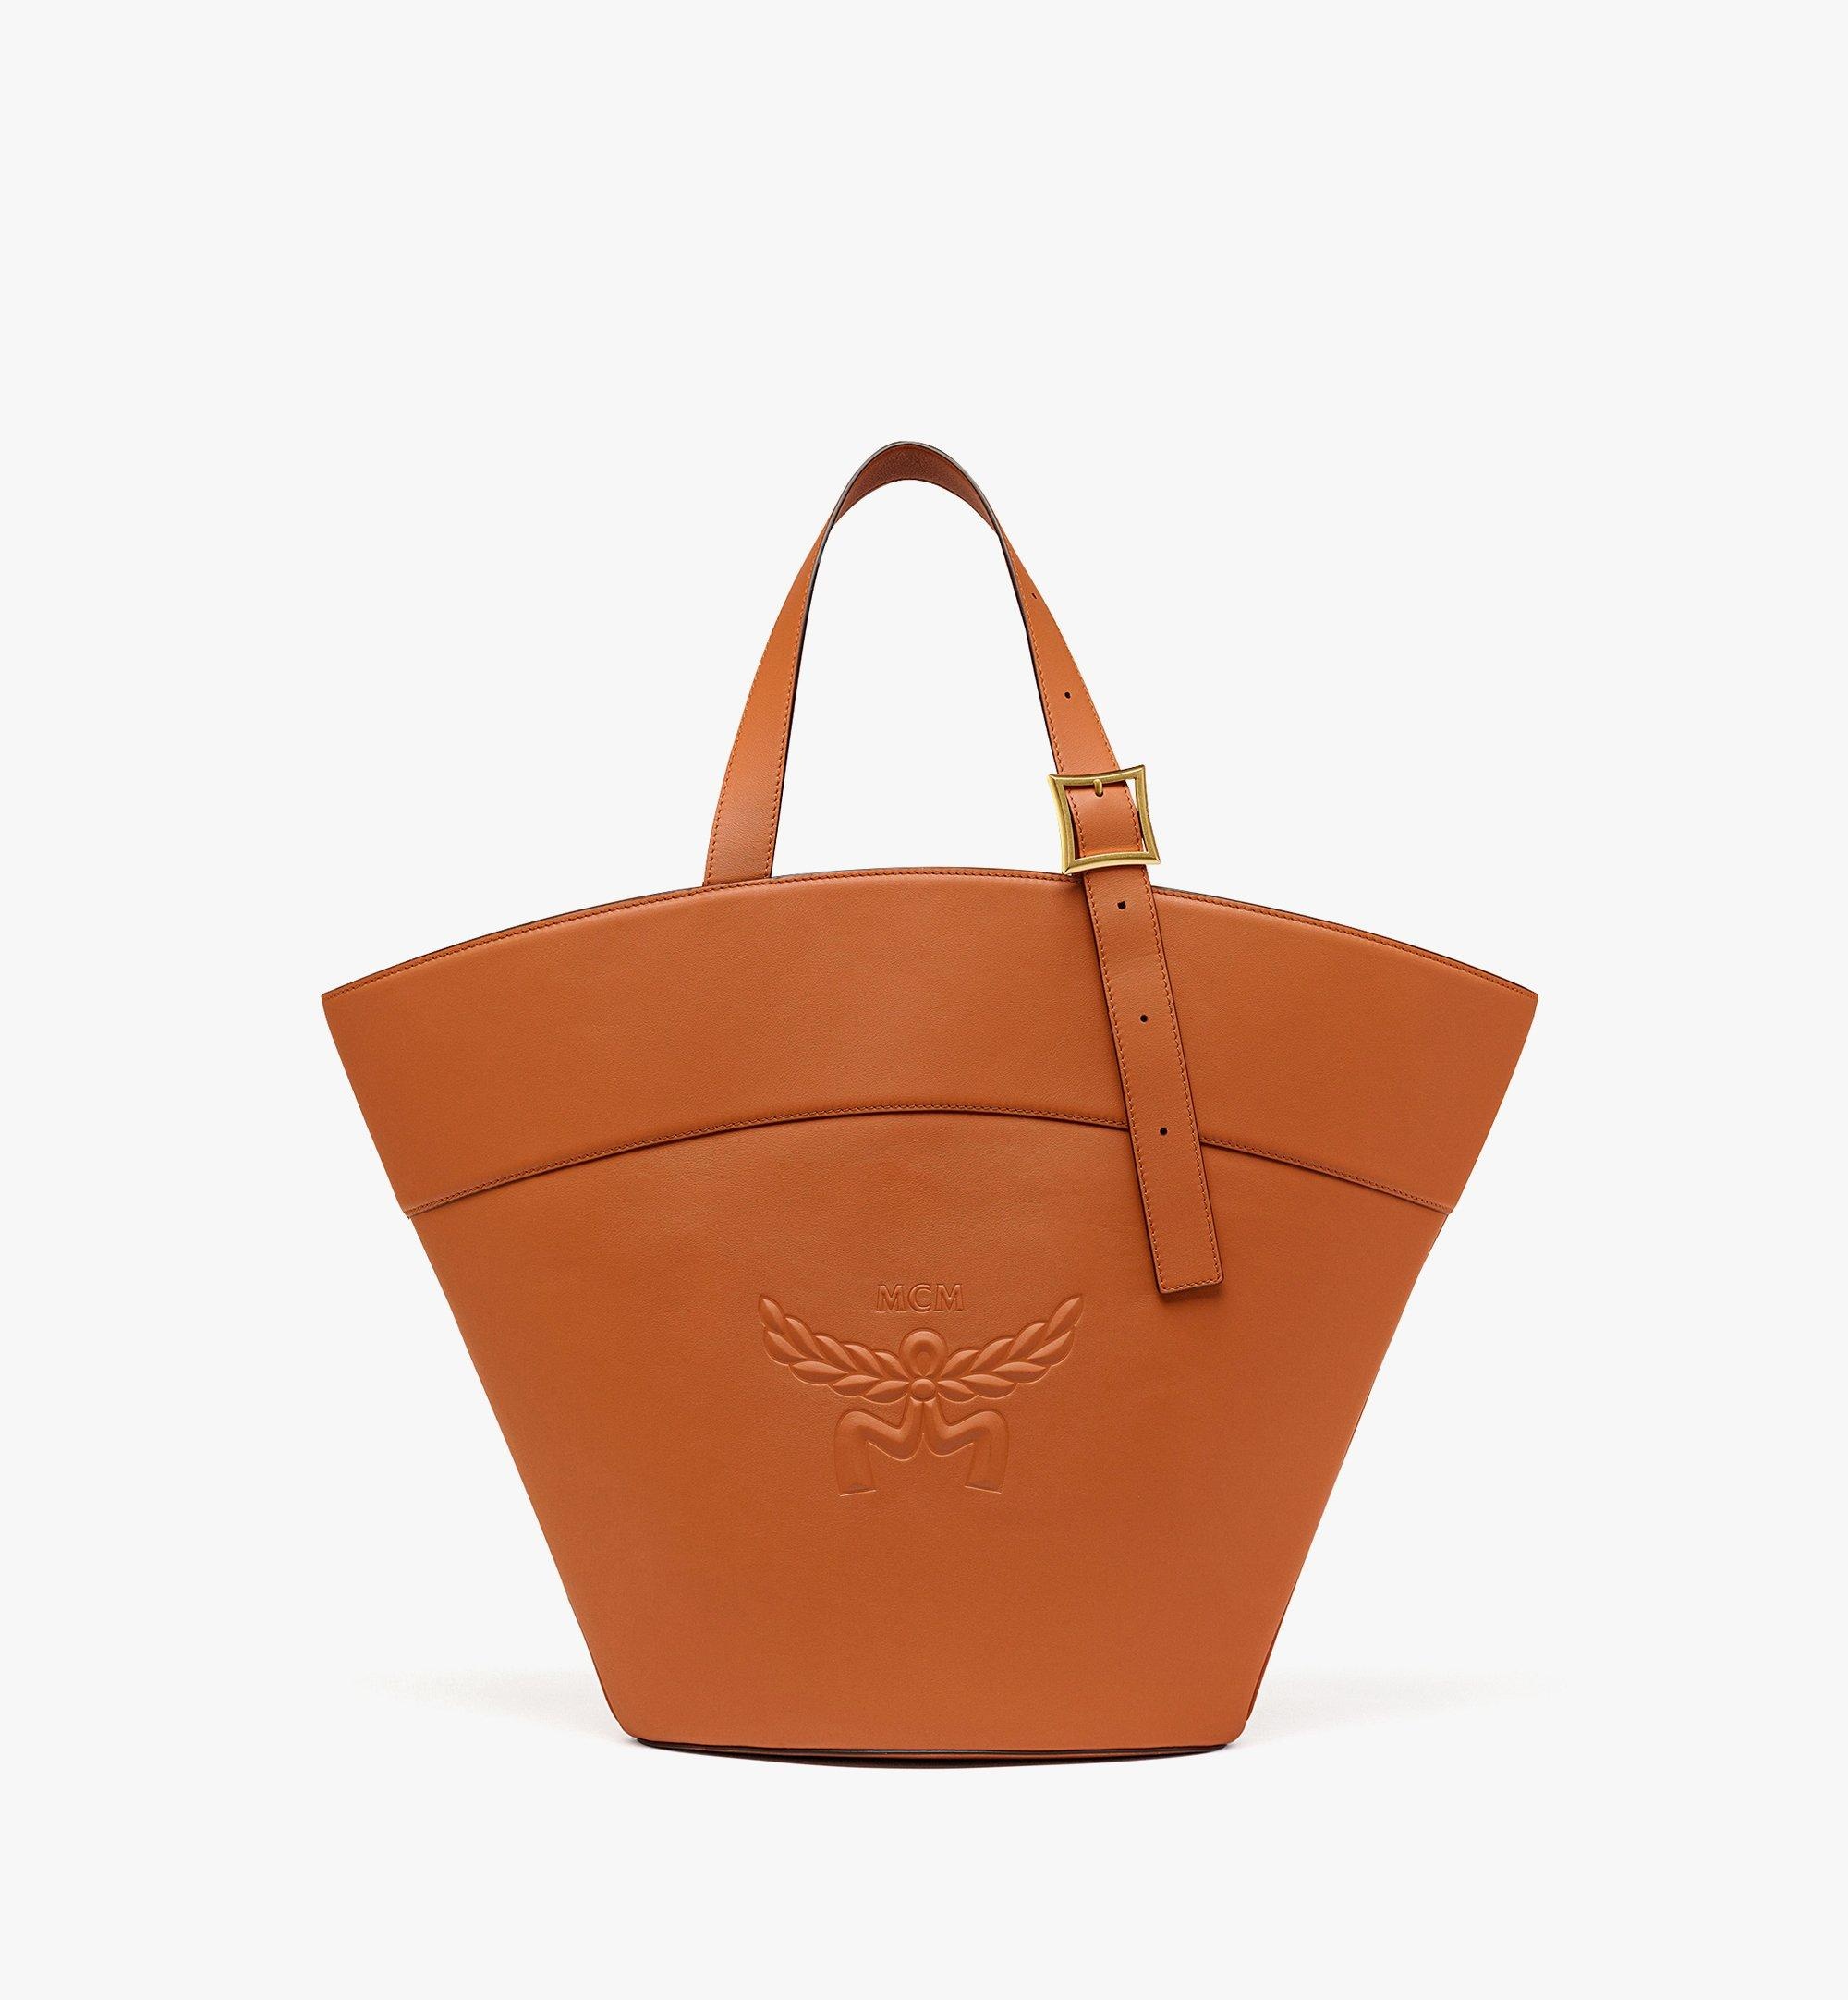 Himmel Tote in Spanish Nappa Leather - 1